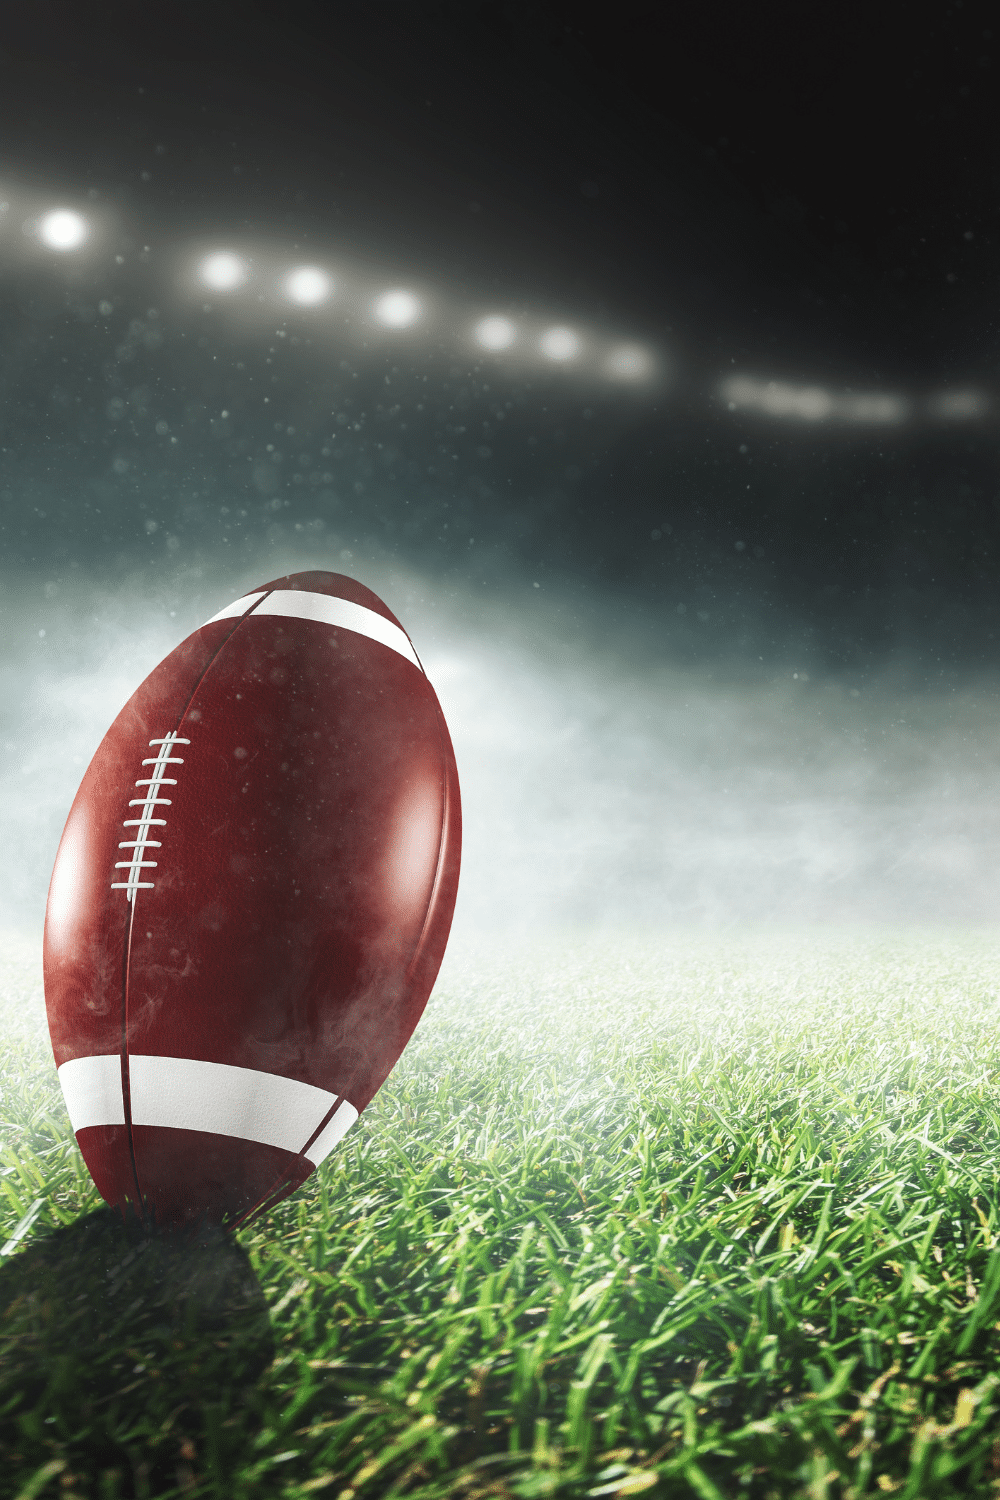 A football propped up in grass on a football field